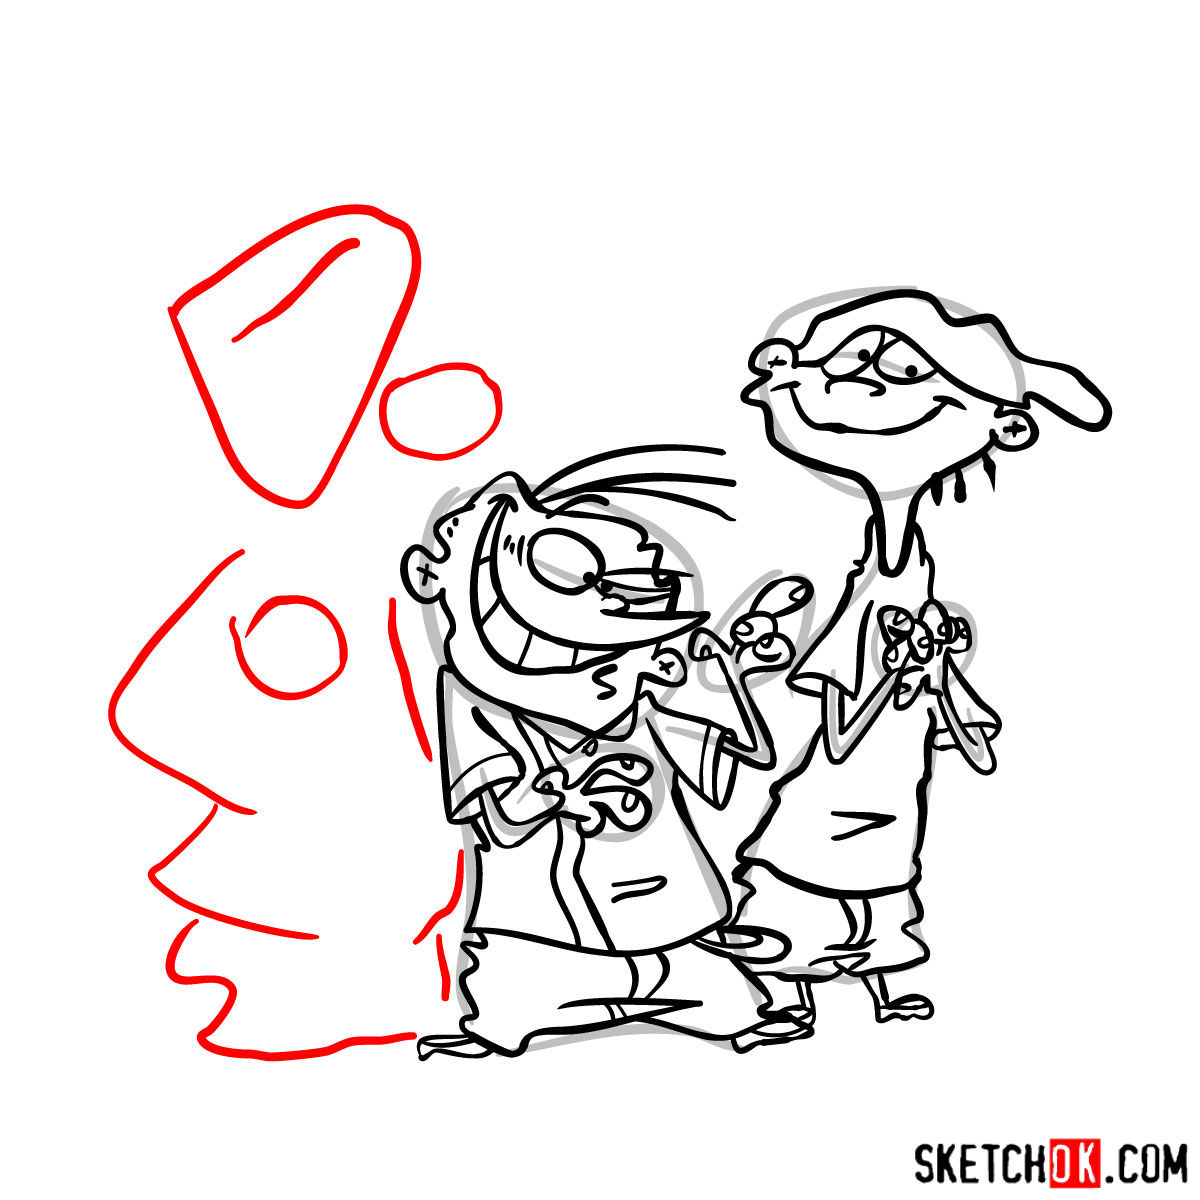 How to draw Ed, Edd and Eddy together - step 20